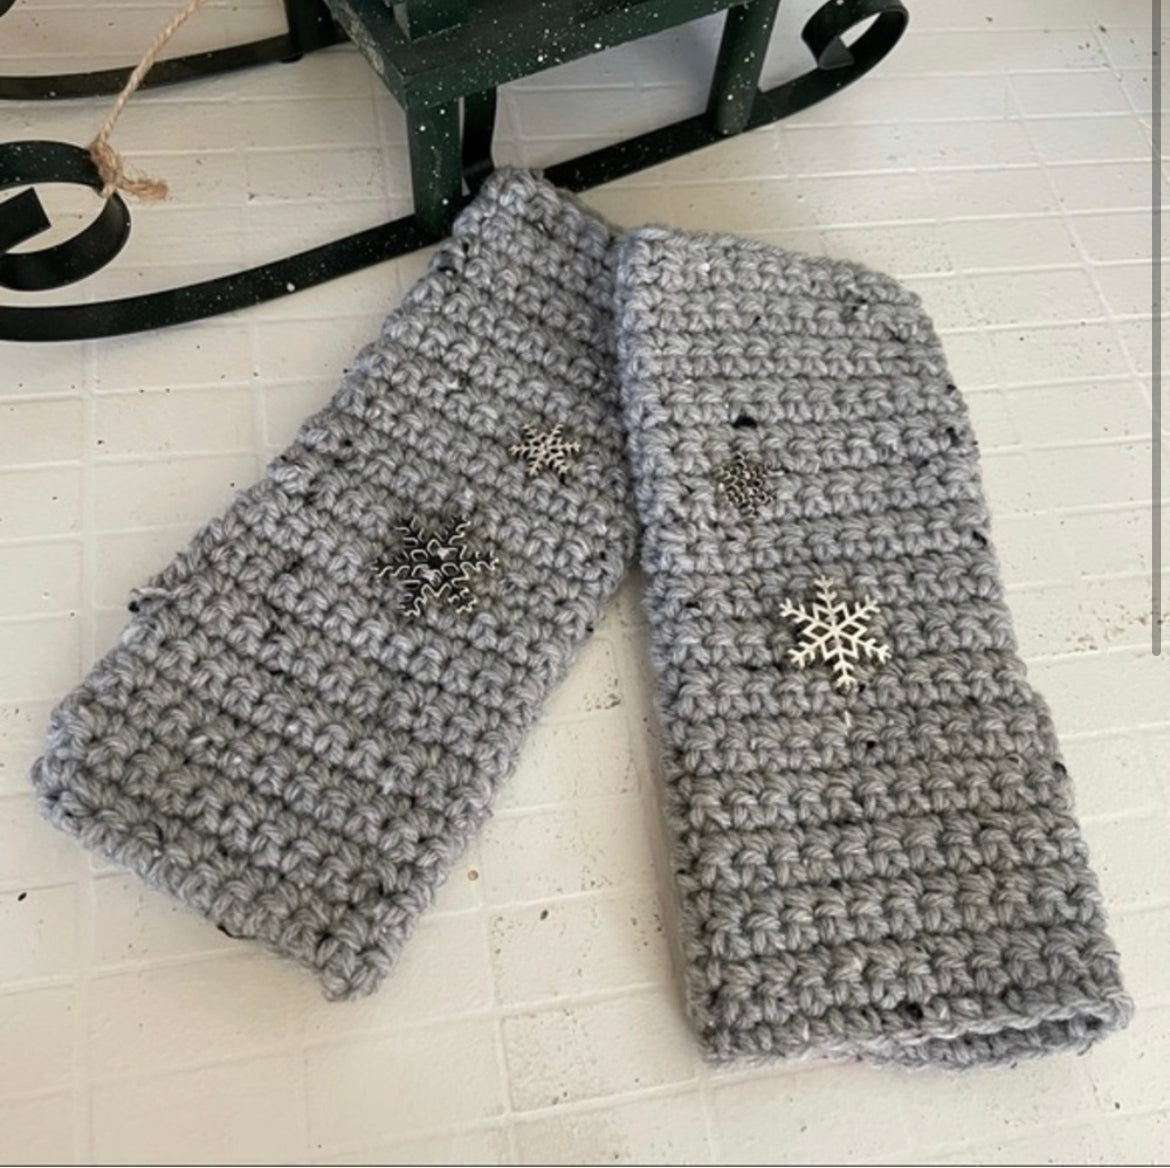 Texting Tech Wrist Warmers Silvery Gray Speckled Tweed & Metal Snowflake Crochet Knit Outdoor Gaming Fingerless Gloves Embellished